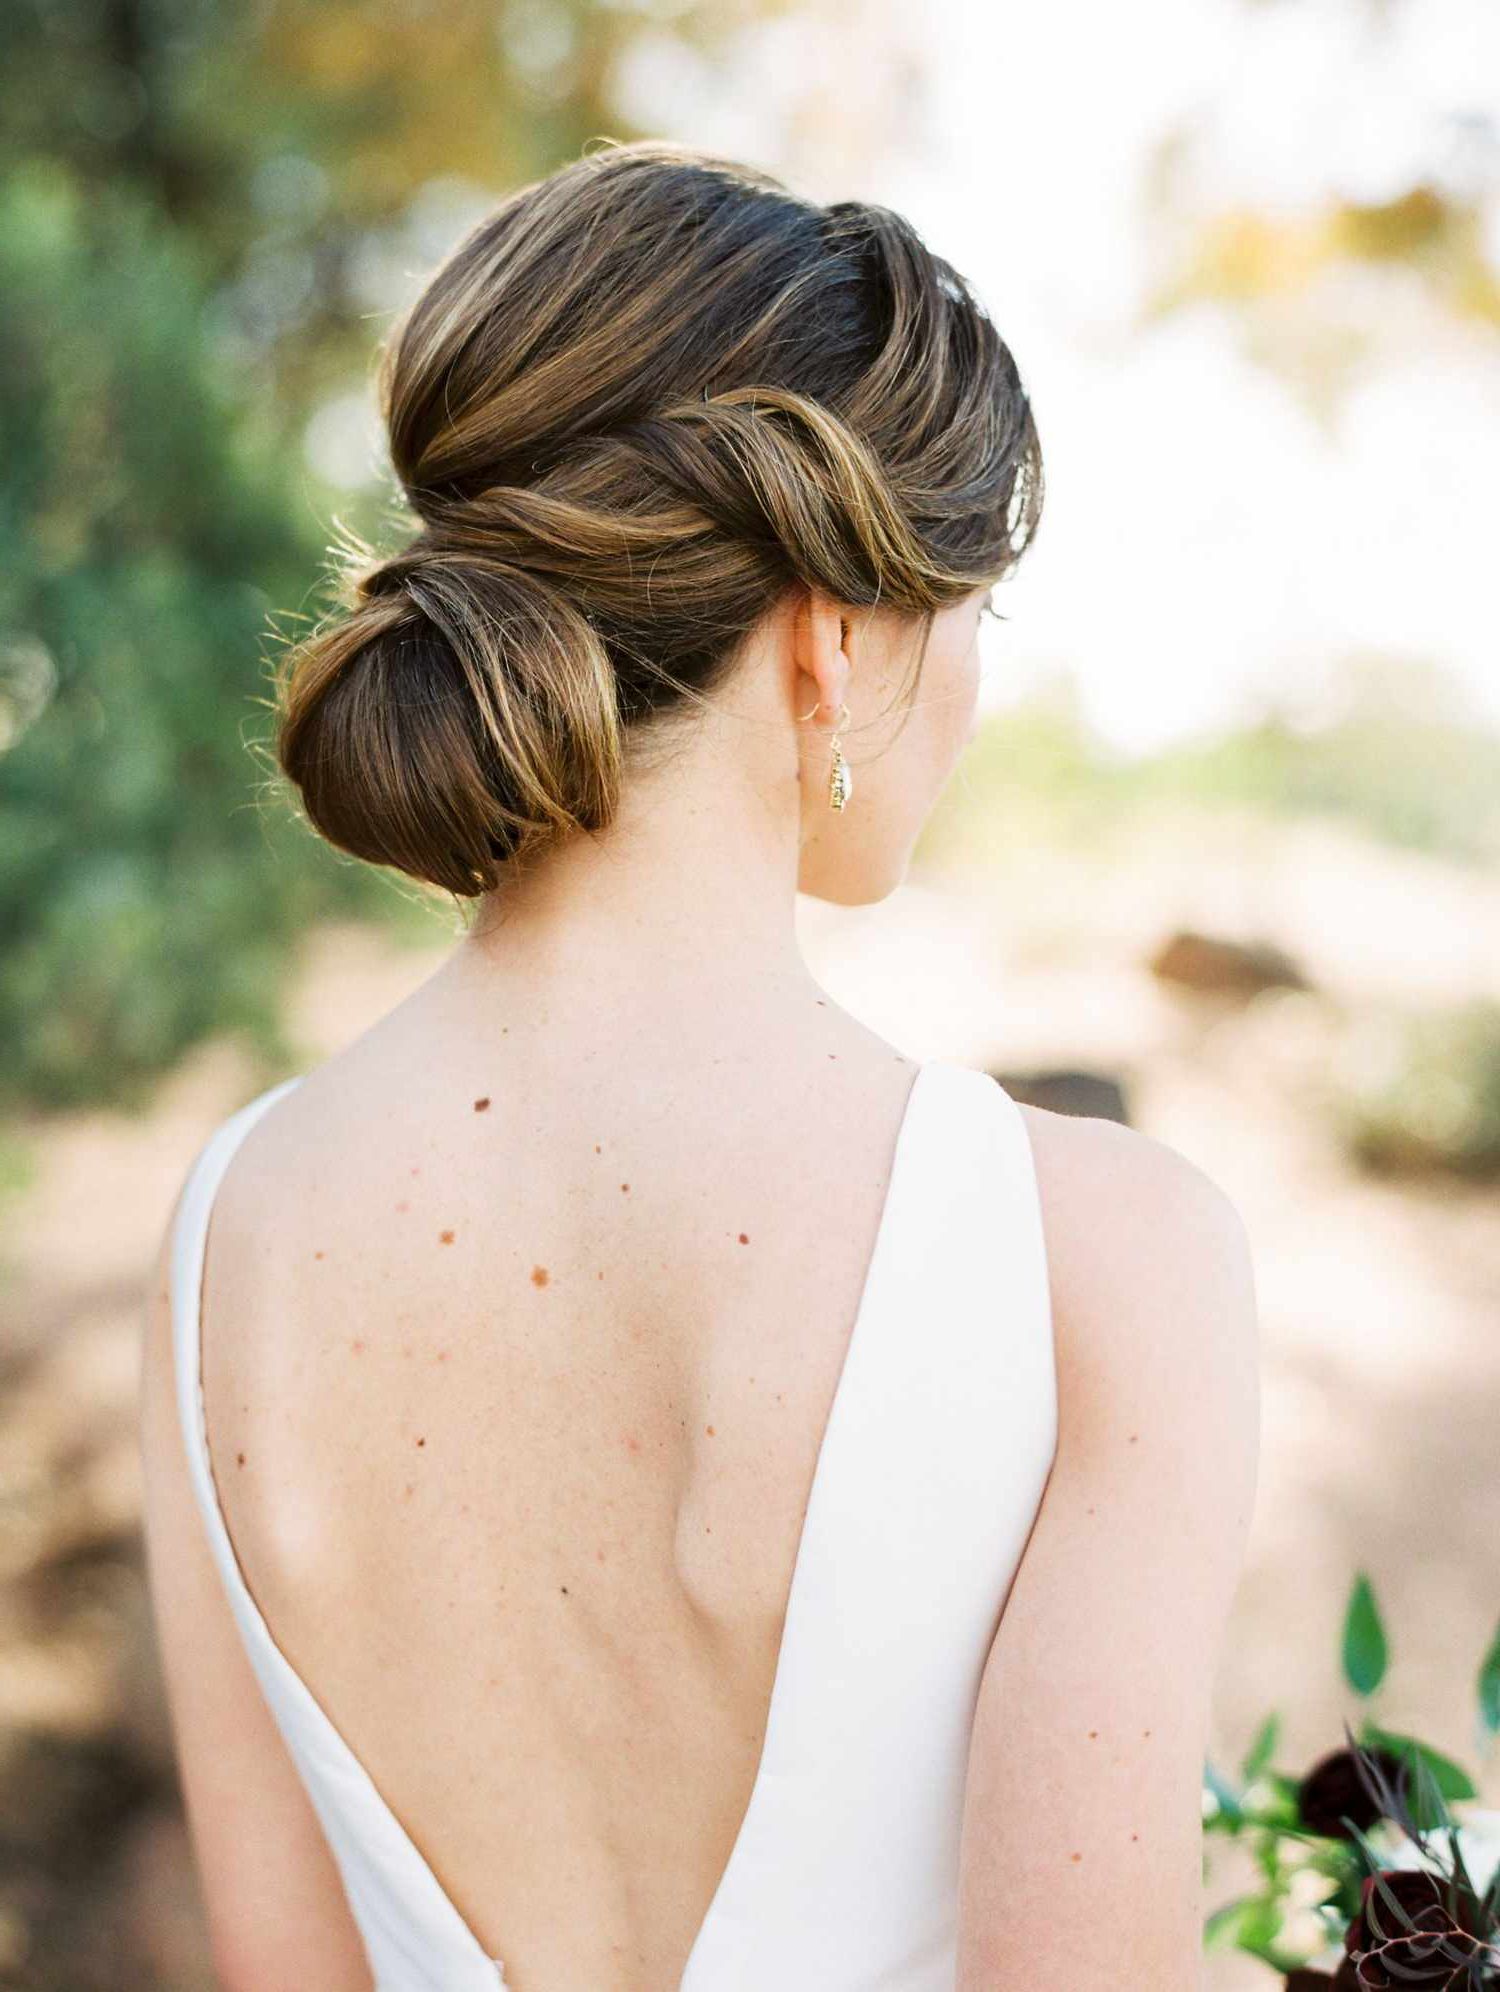 24 Low Bun Wedding Hair Ideas Intended For Low Chignon Updo (View 16 of 28)